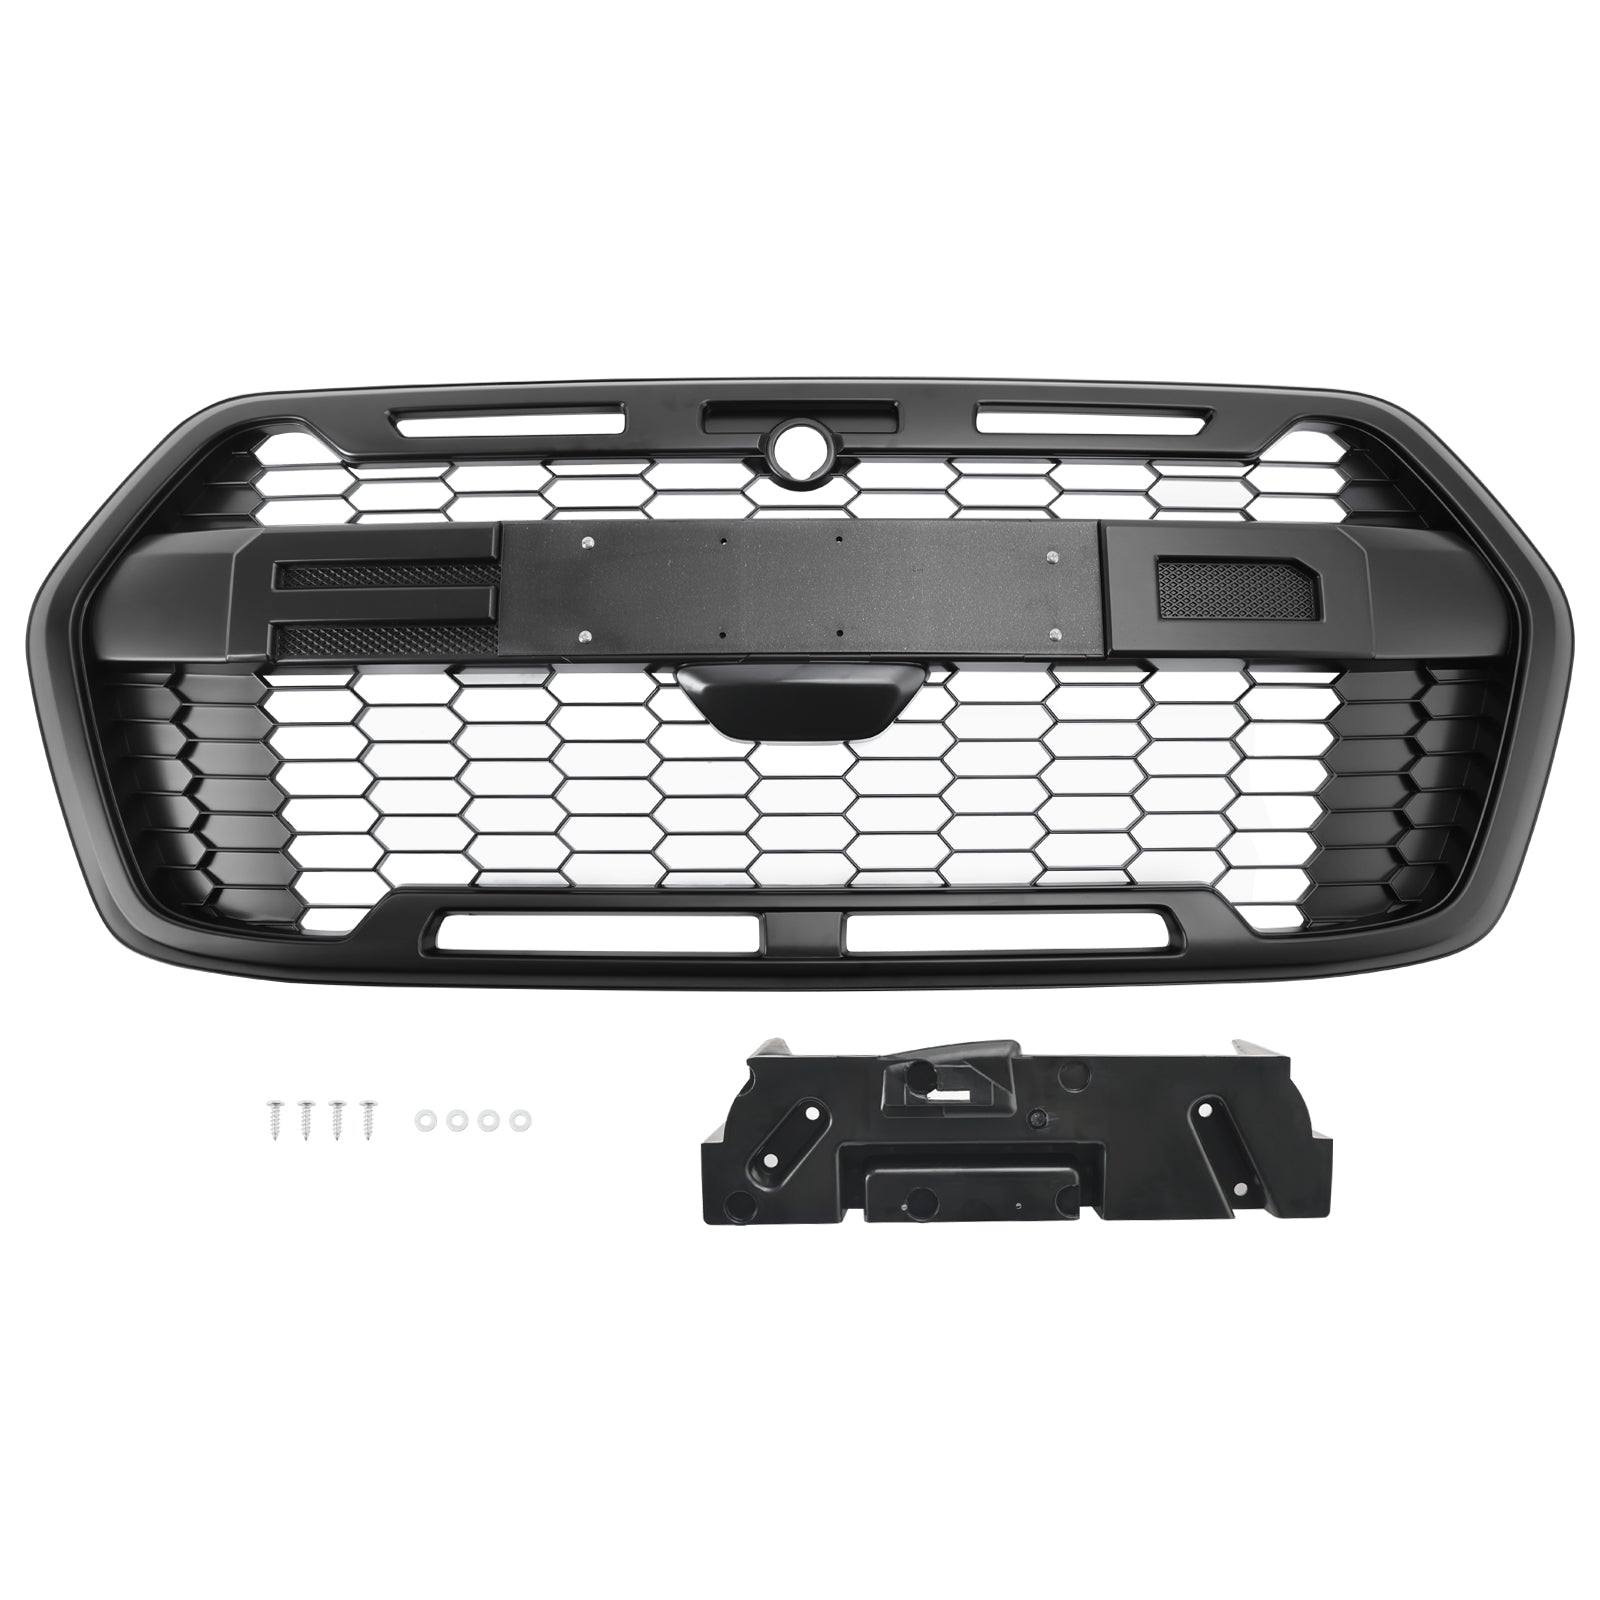 Raptor Style Front Bumper Grille Grill 2467809 Pour Ford Transit MK8 Trail 2019+